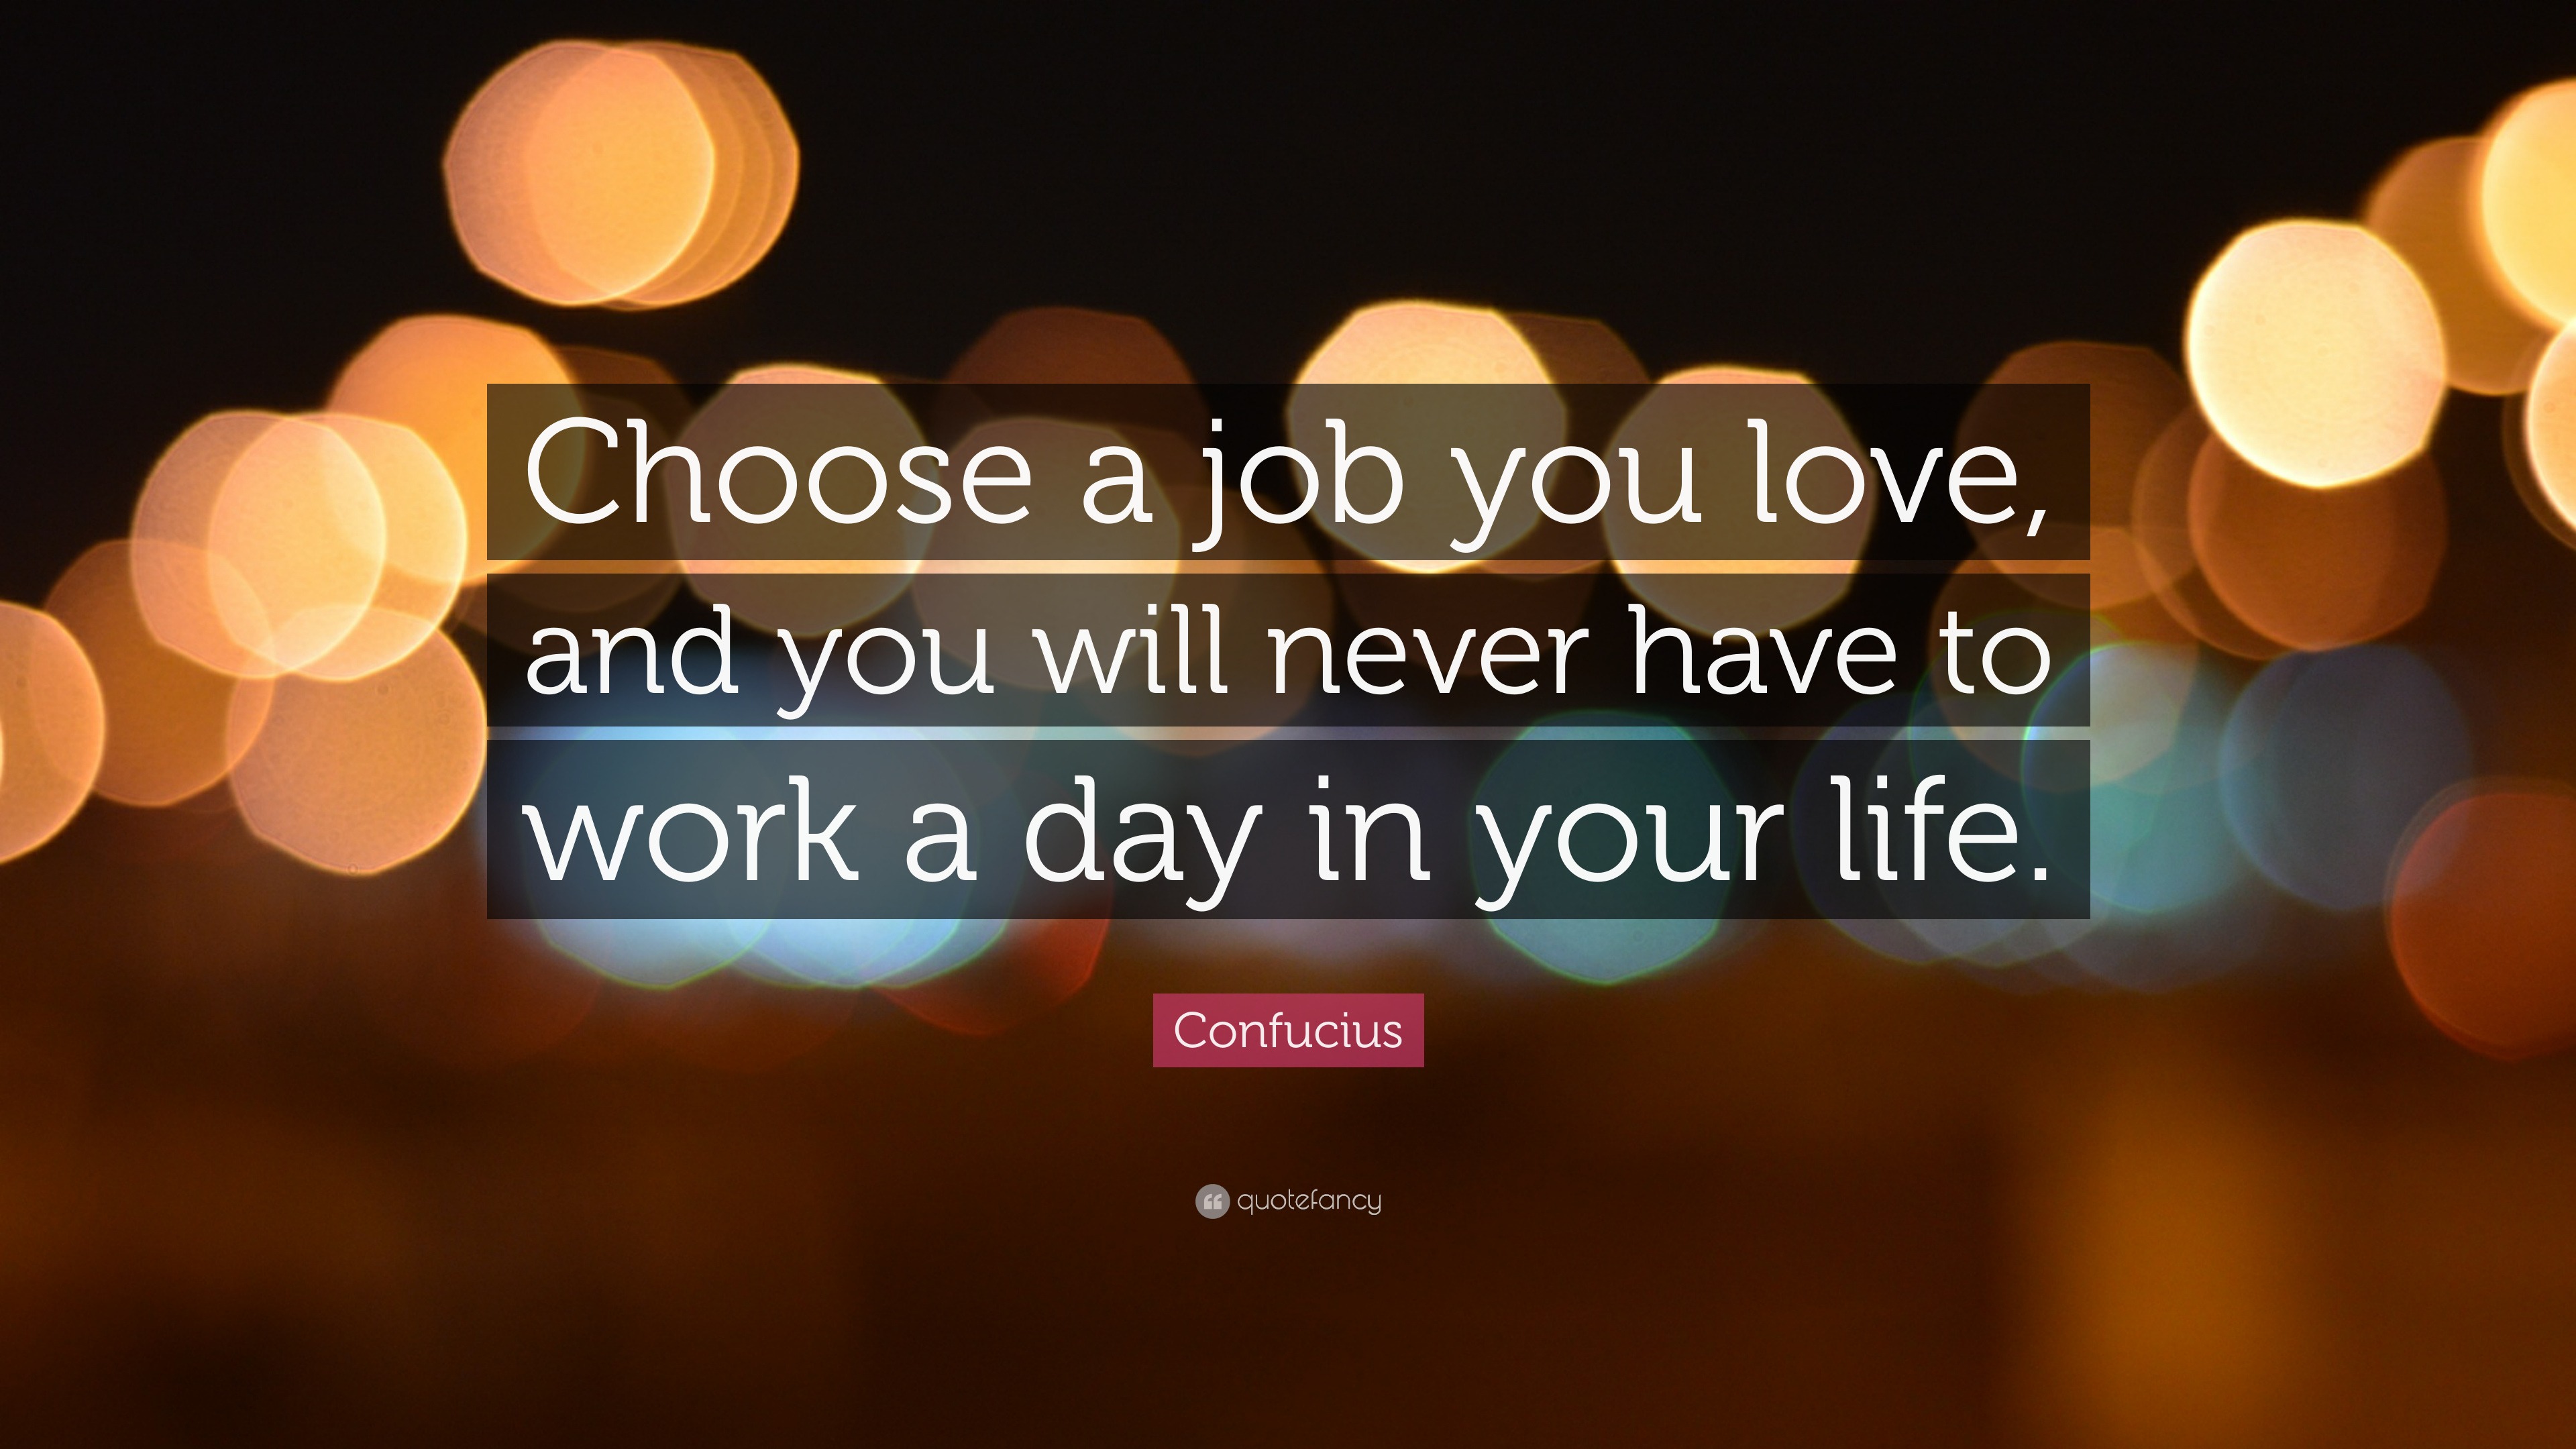 Confucius Quote: "Choose a job you love, and you will ...